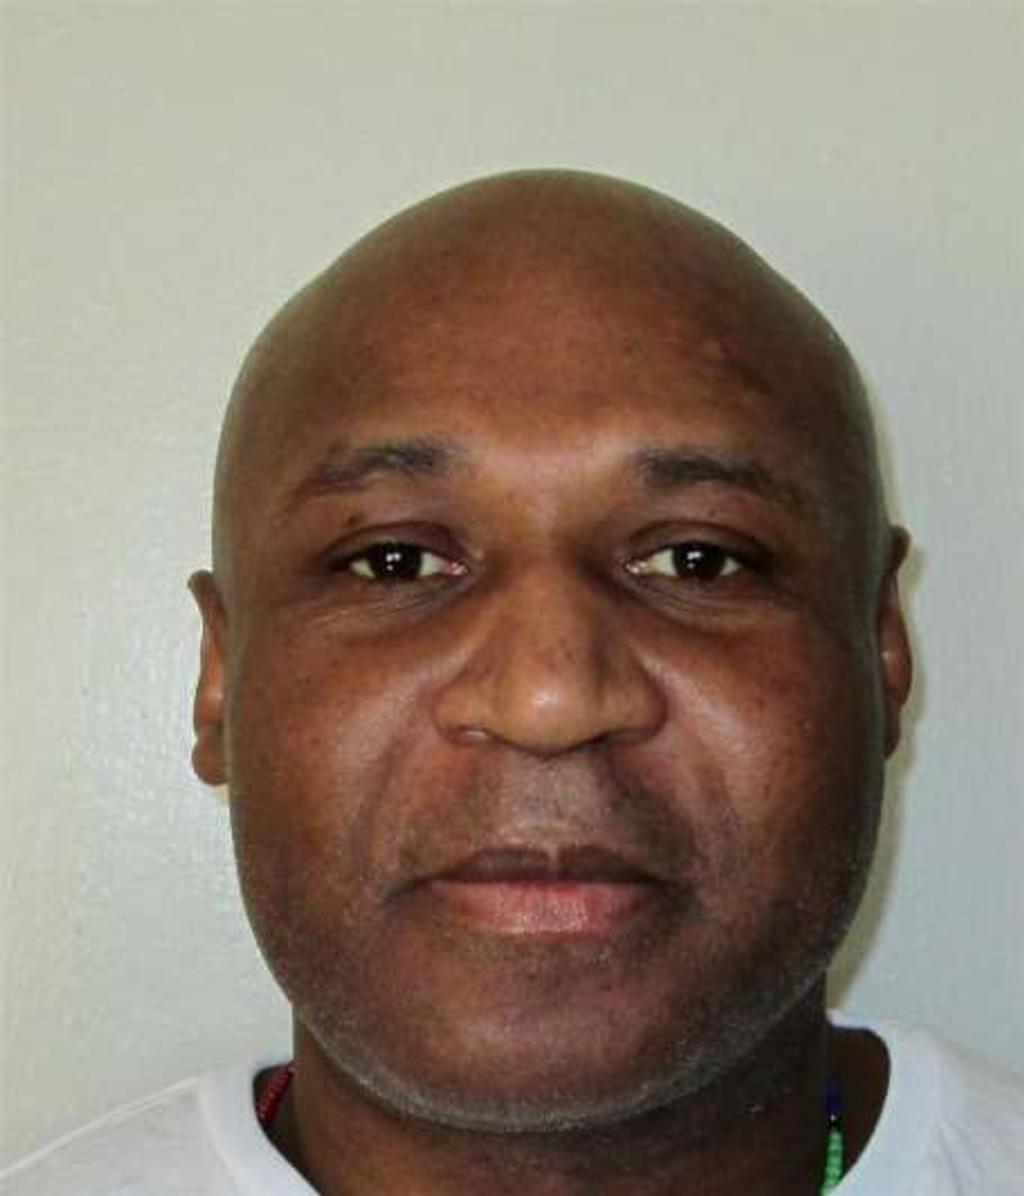 Federal Court Finds Intentional Misconduct by Alabama Prosecutor, But Lets Death Penalty Stand